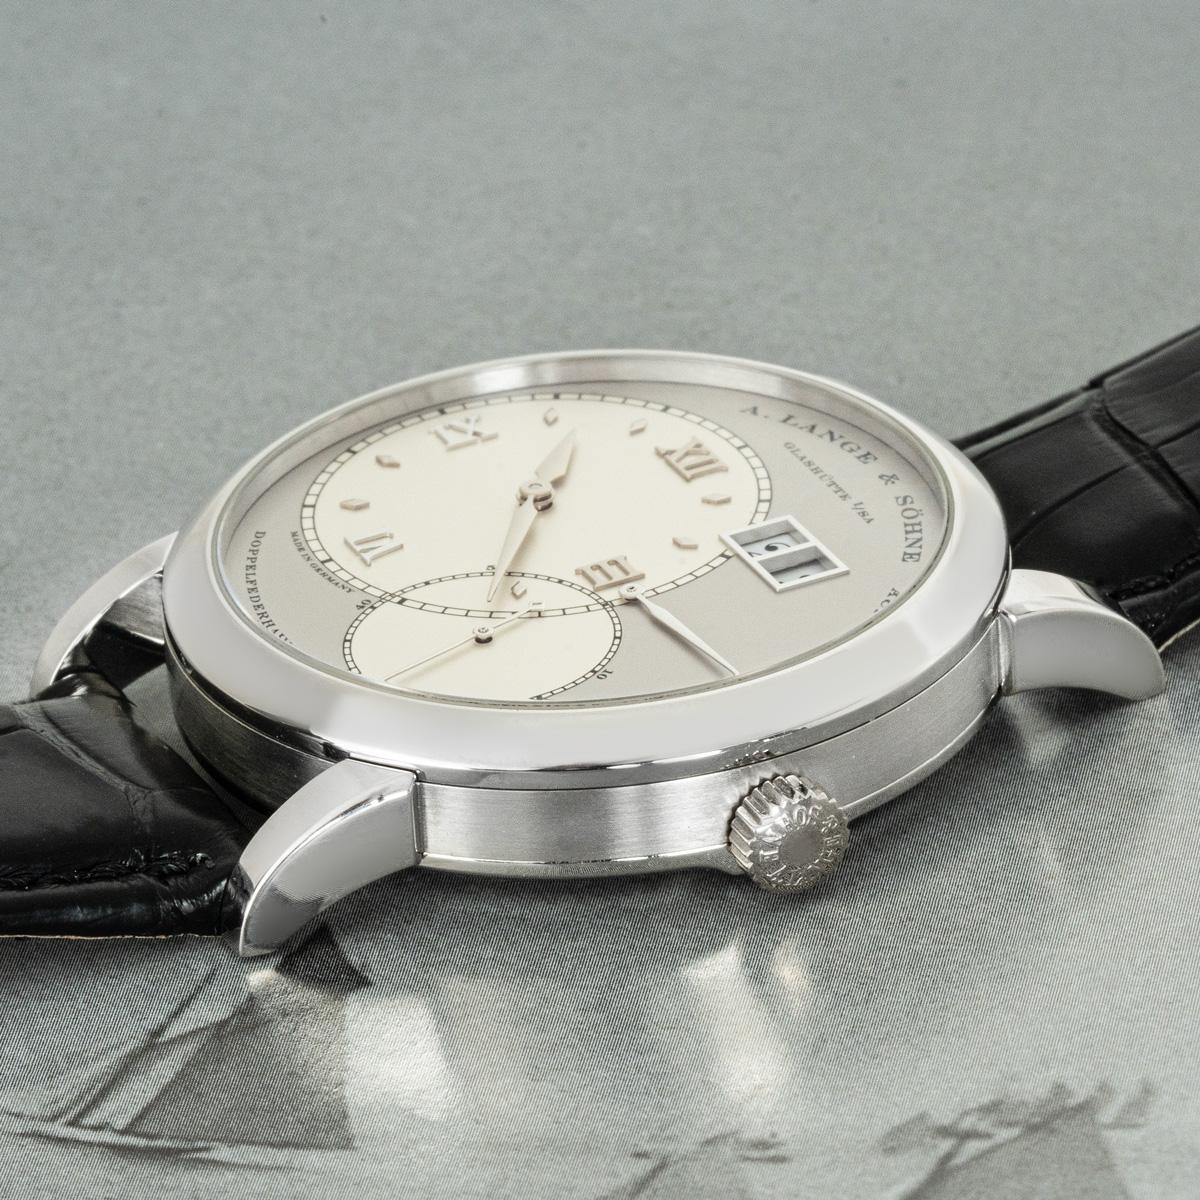 A platinum Grand Lange 1 by A. Lange & Sohne. Featuring a silver dial with a date display, power reserve indicator and a small seconds display.

The black Lange leather strap comes with a Lange platinum pin buckle. Fitted with sapphire crystal and a